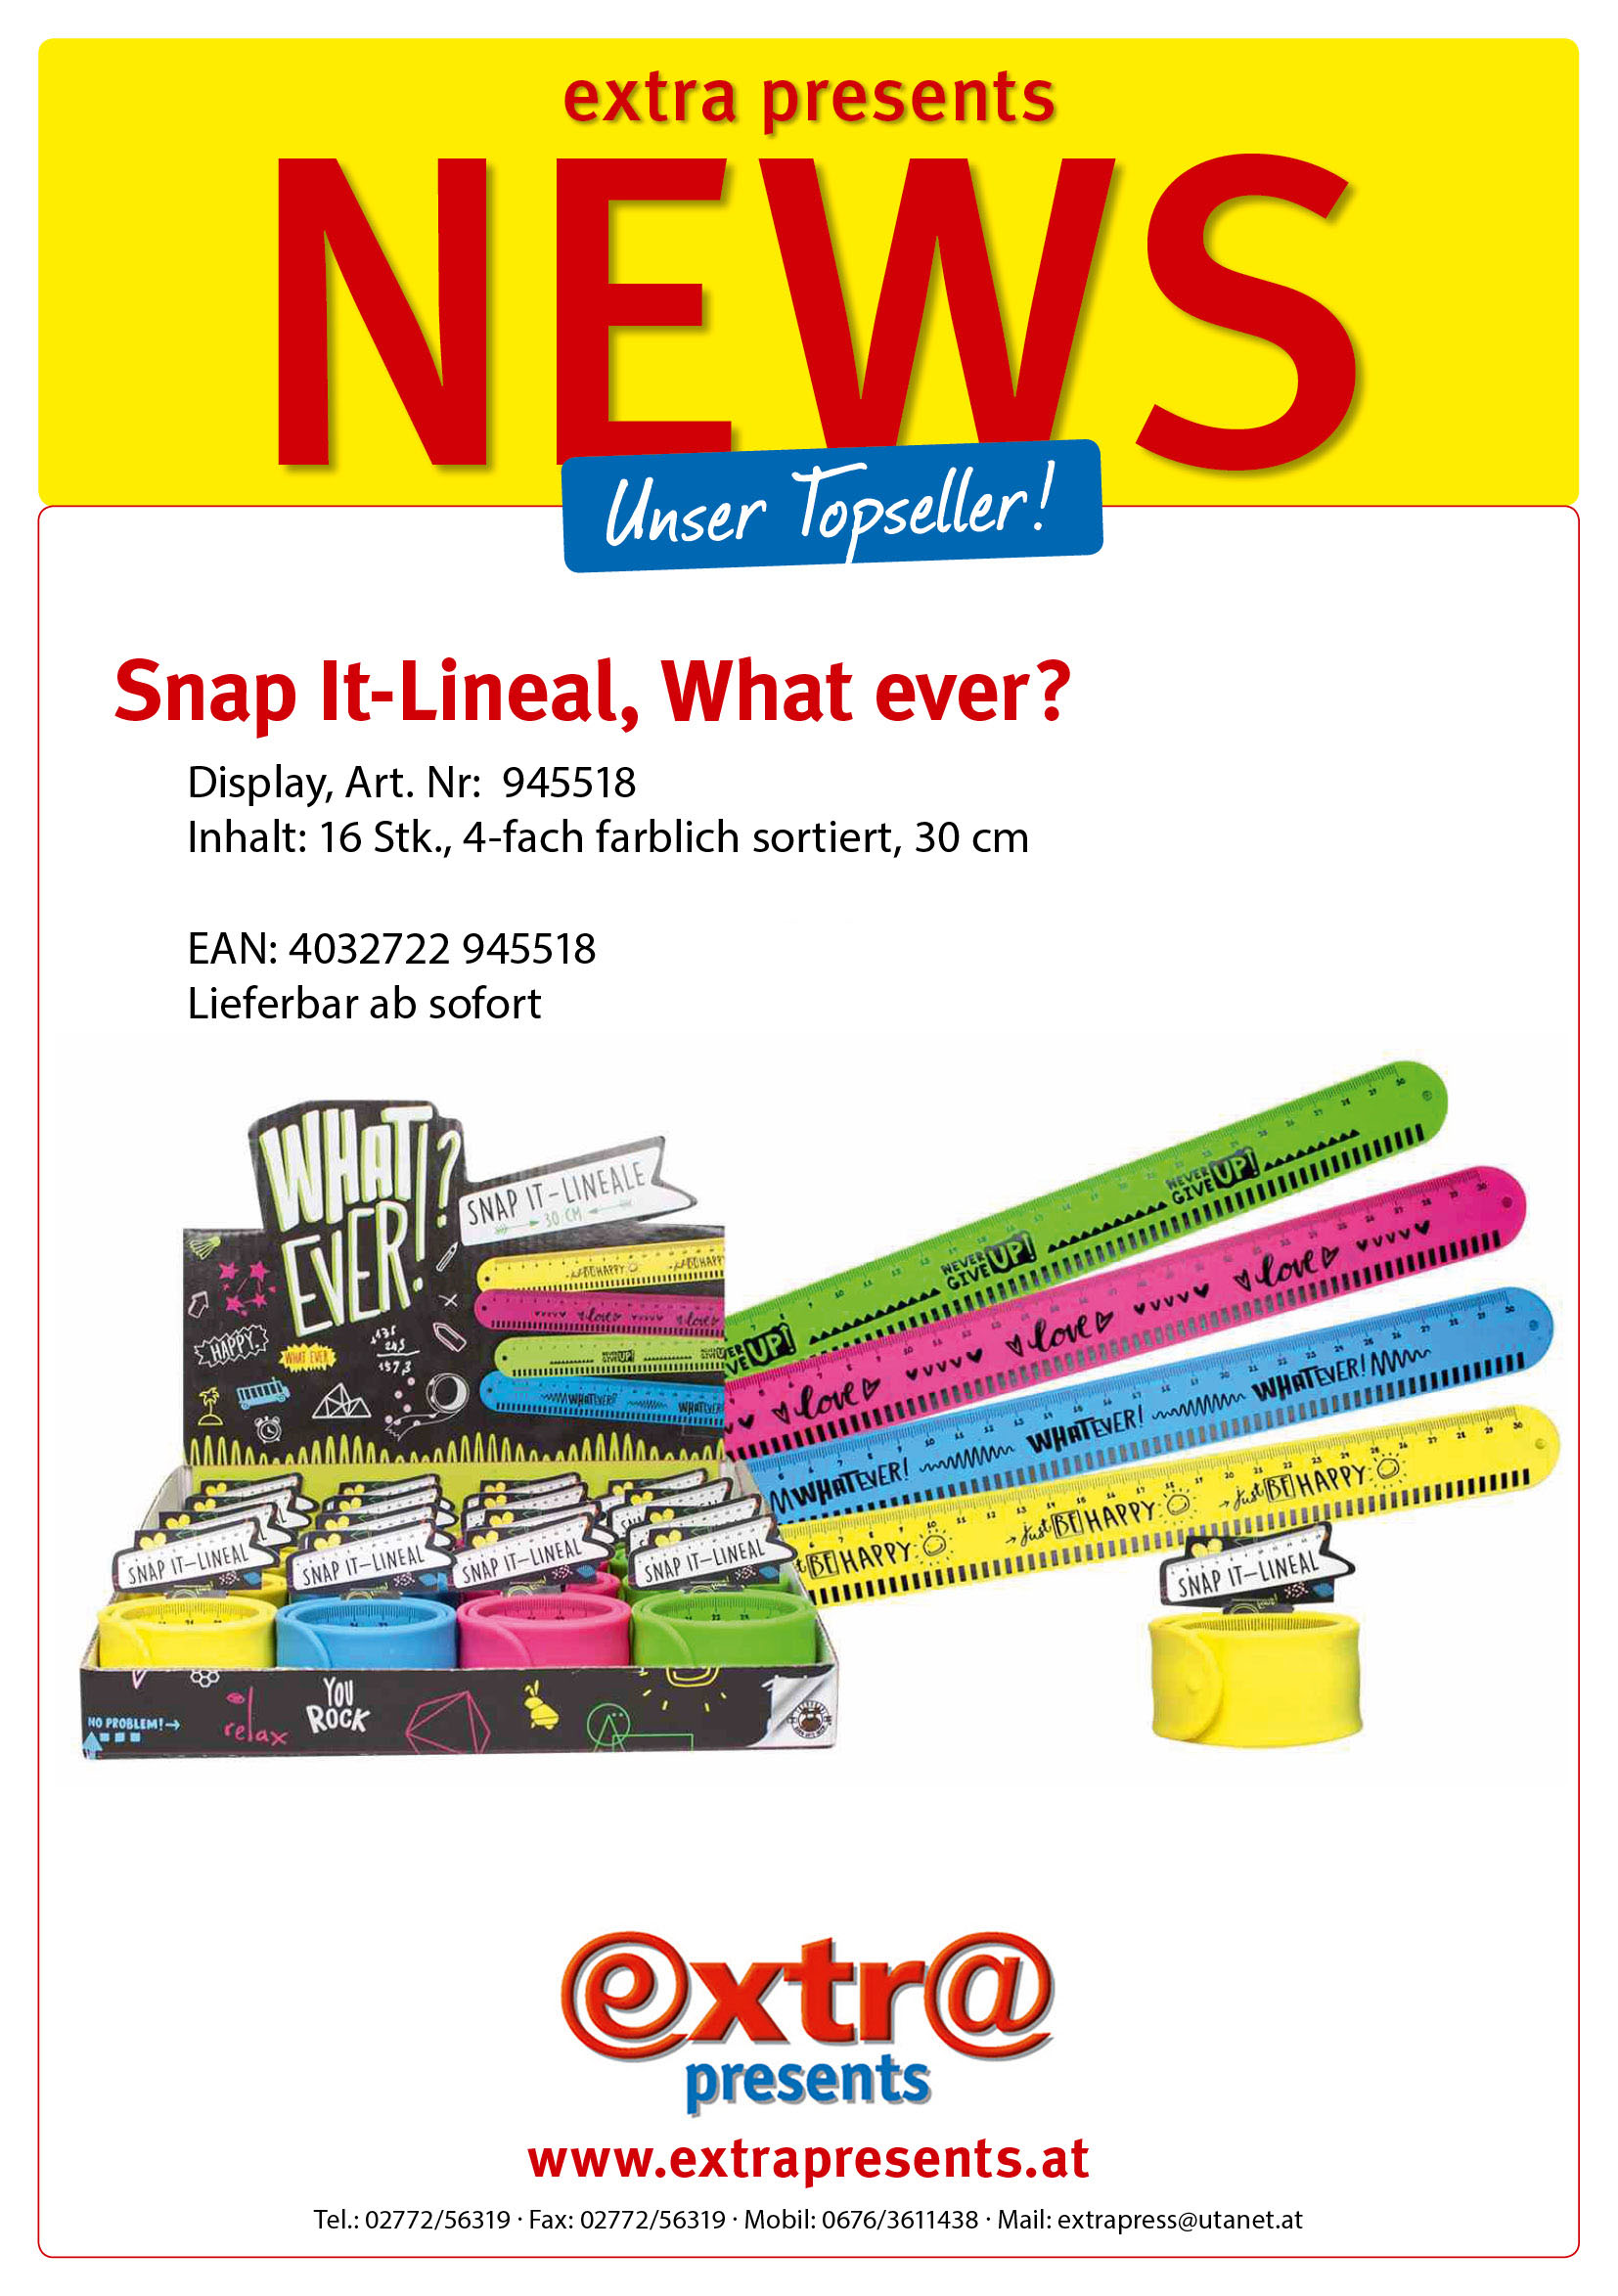 Snap It-Lineal, What ever?